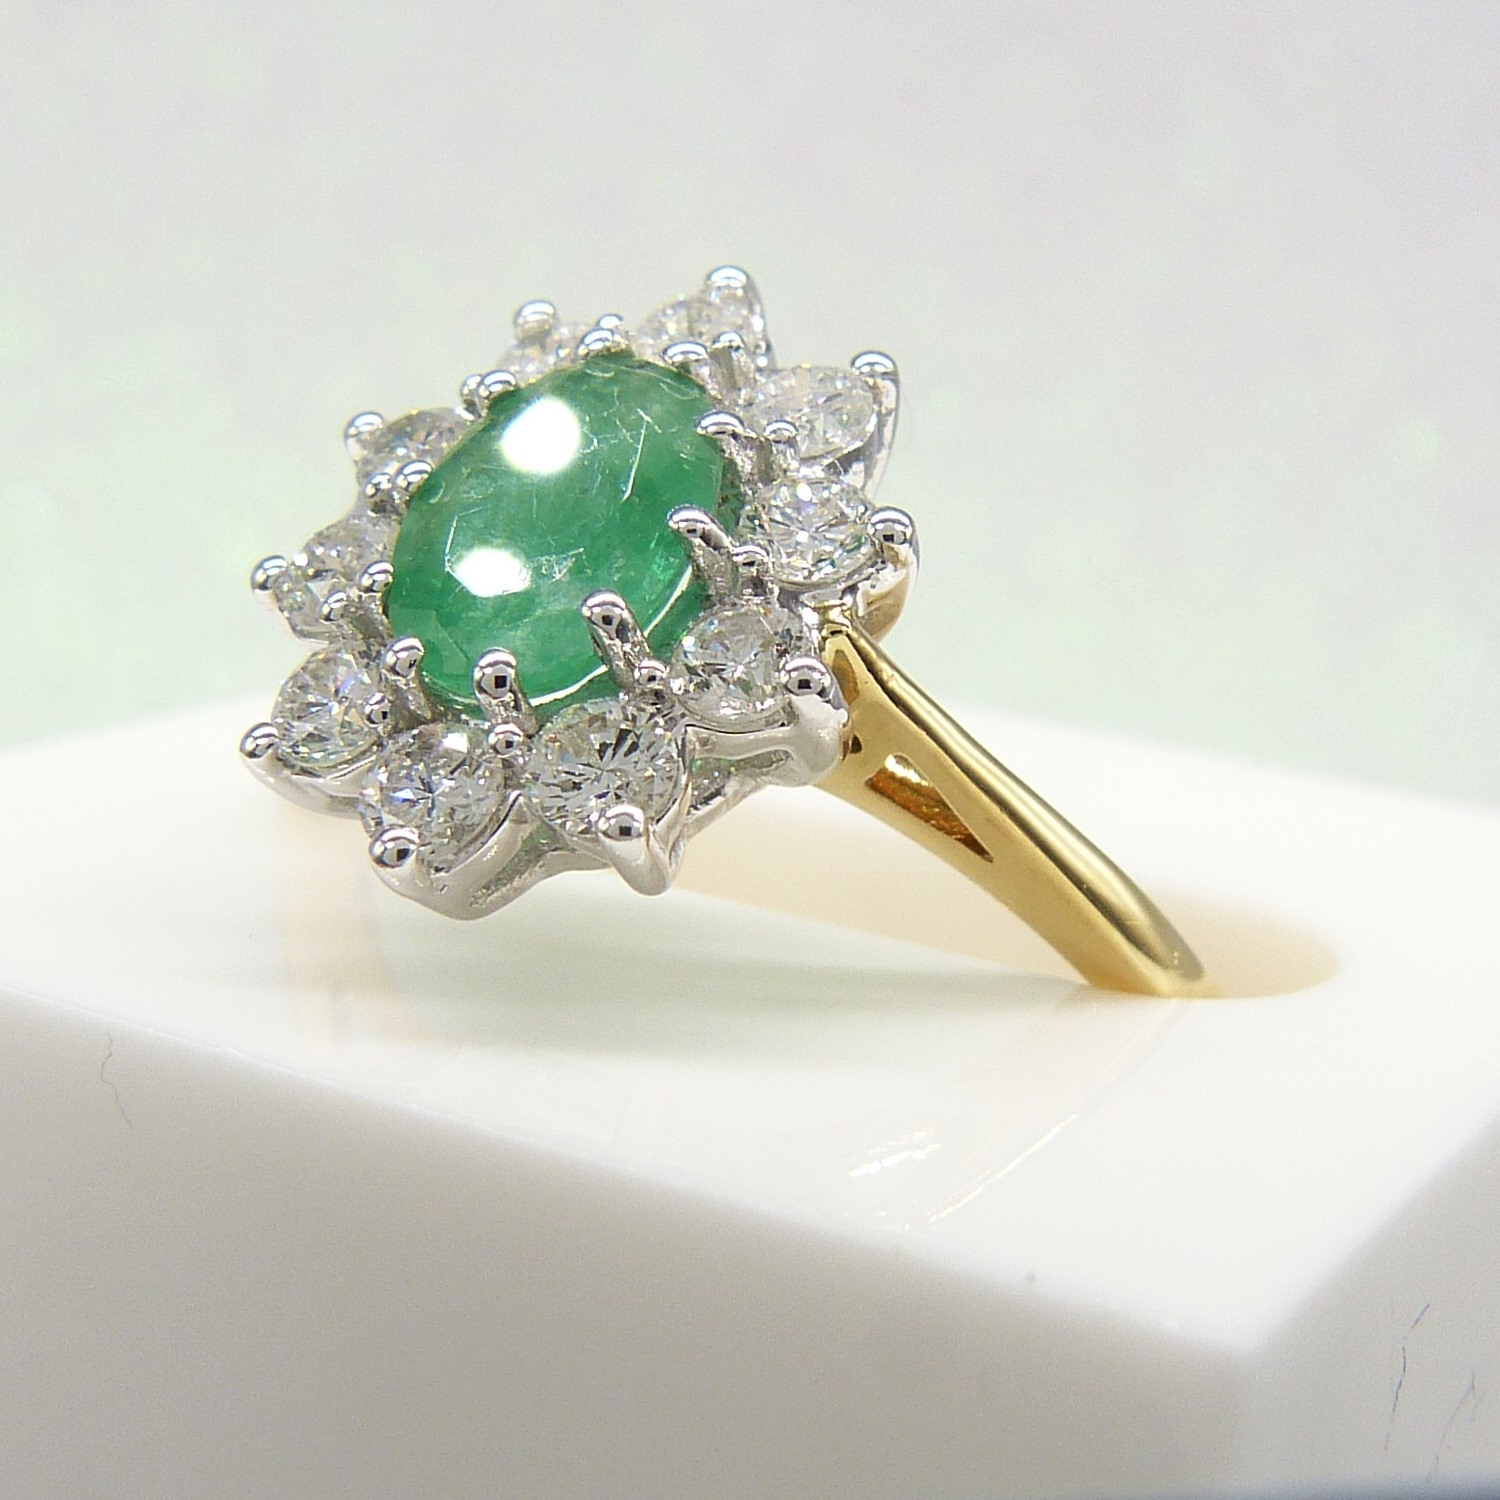 A certificated 18ct yellow Gold oval Emerald gemstone and round brilliant-cut Diamond ring - Image 6 of 10